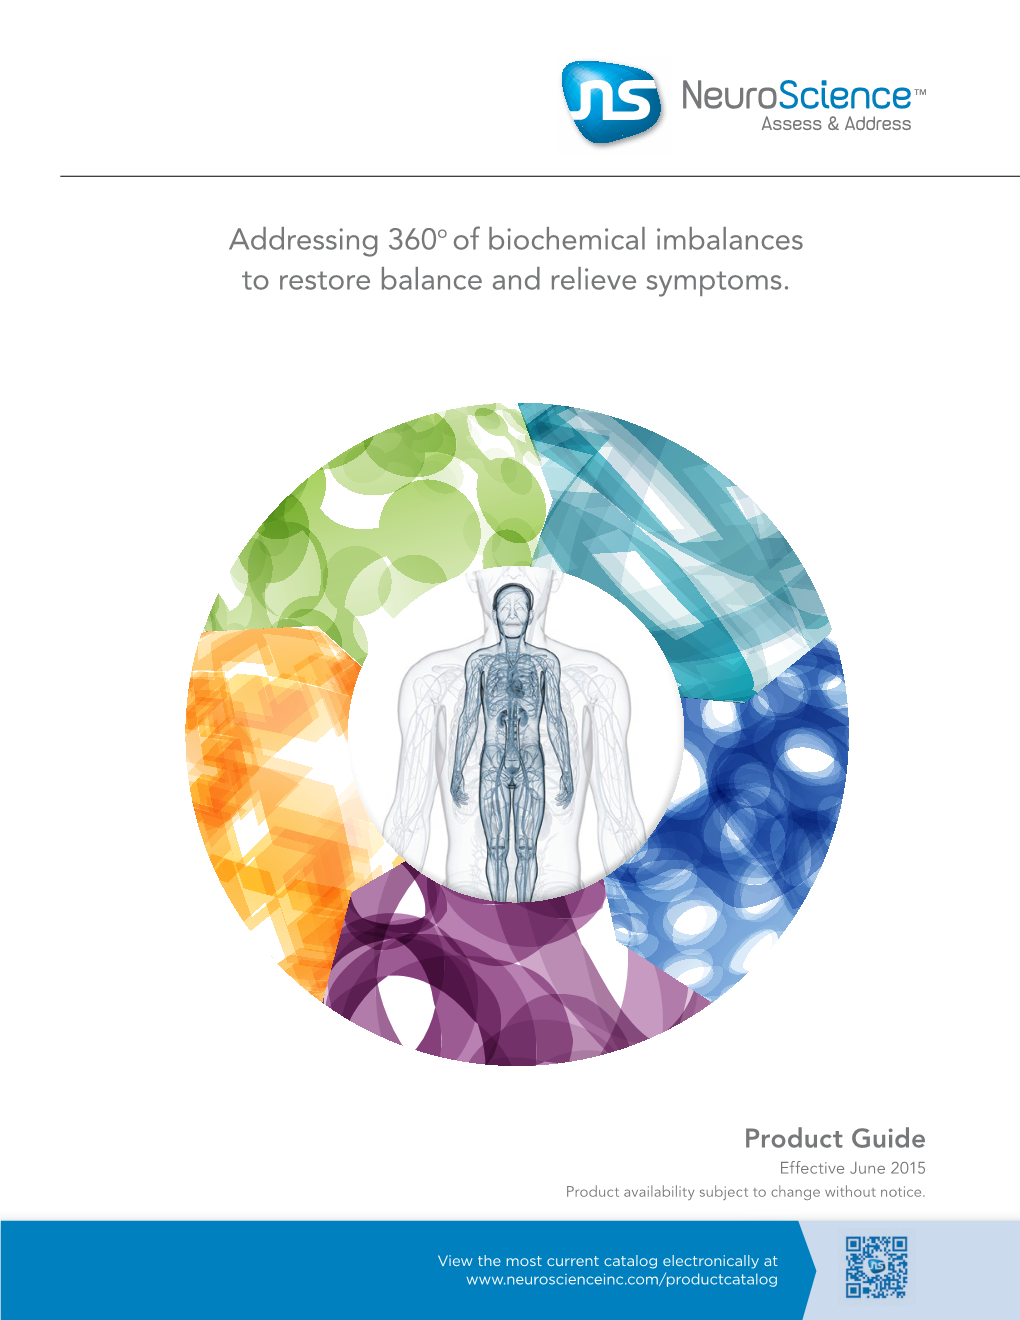 Addressing 360O of Biochemical Imbalances to Restore Balance and Relieve Symptoms